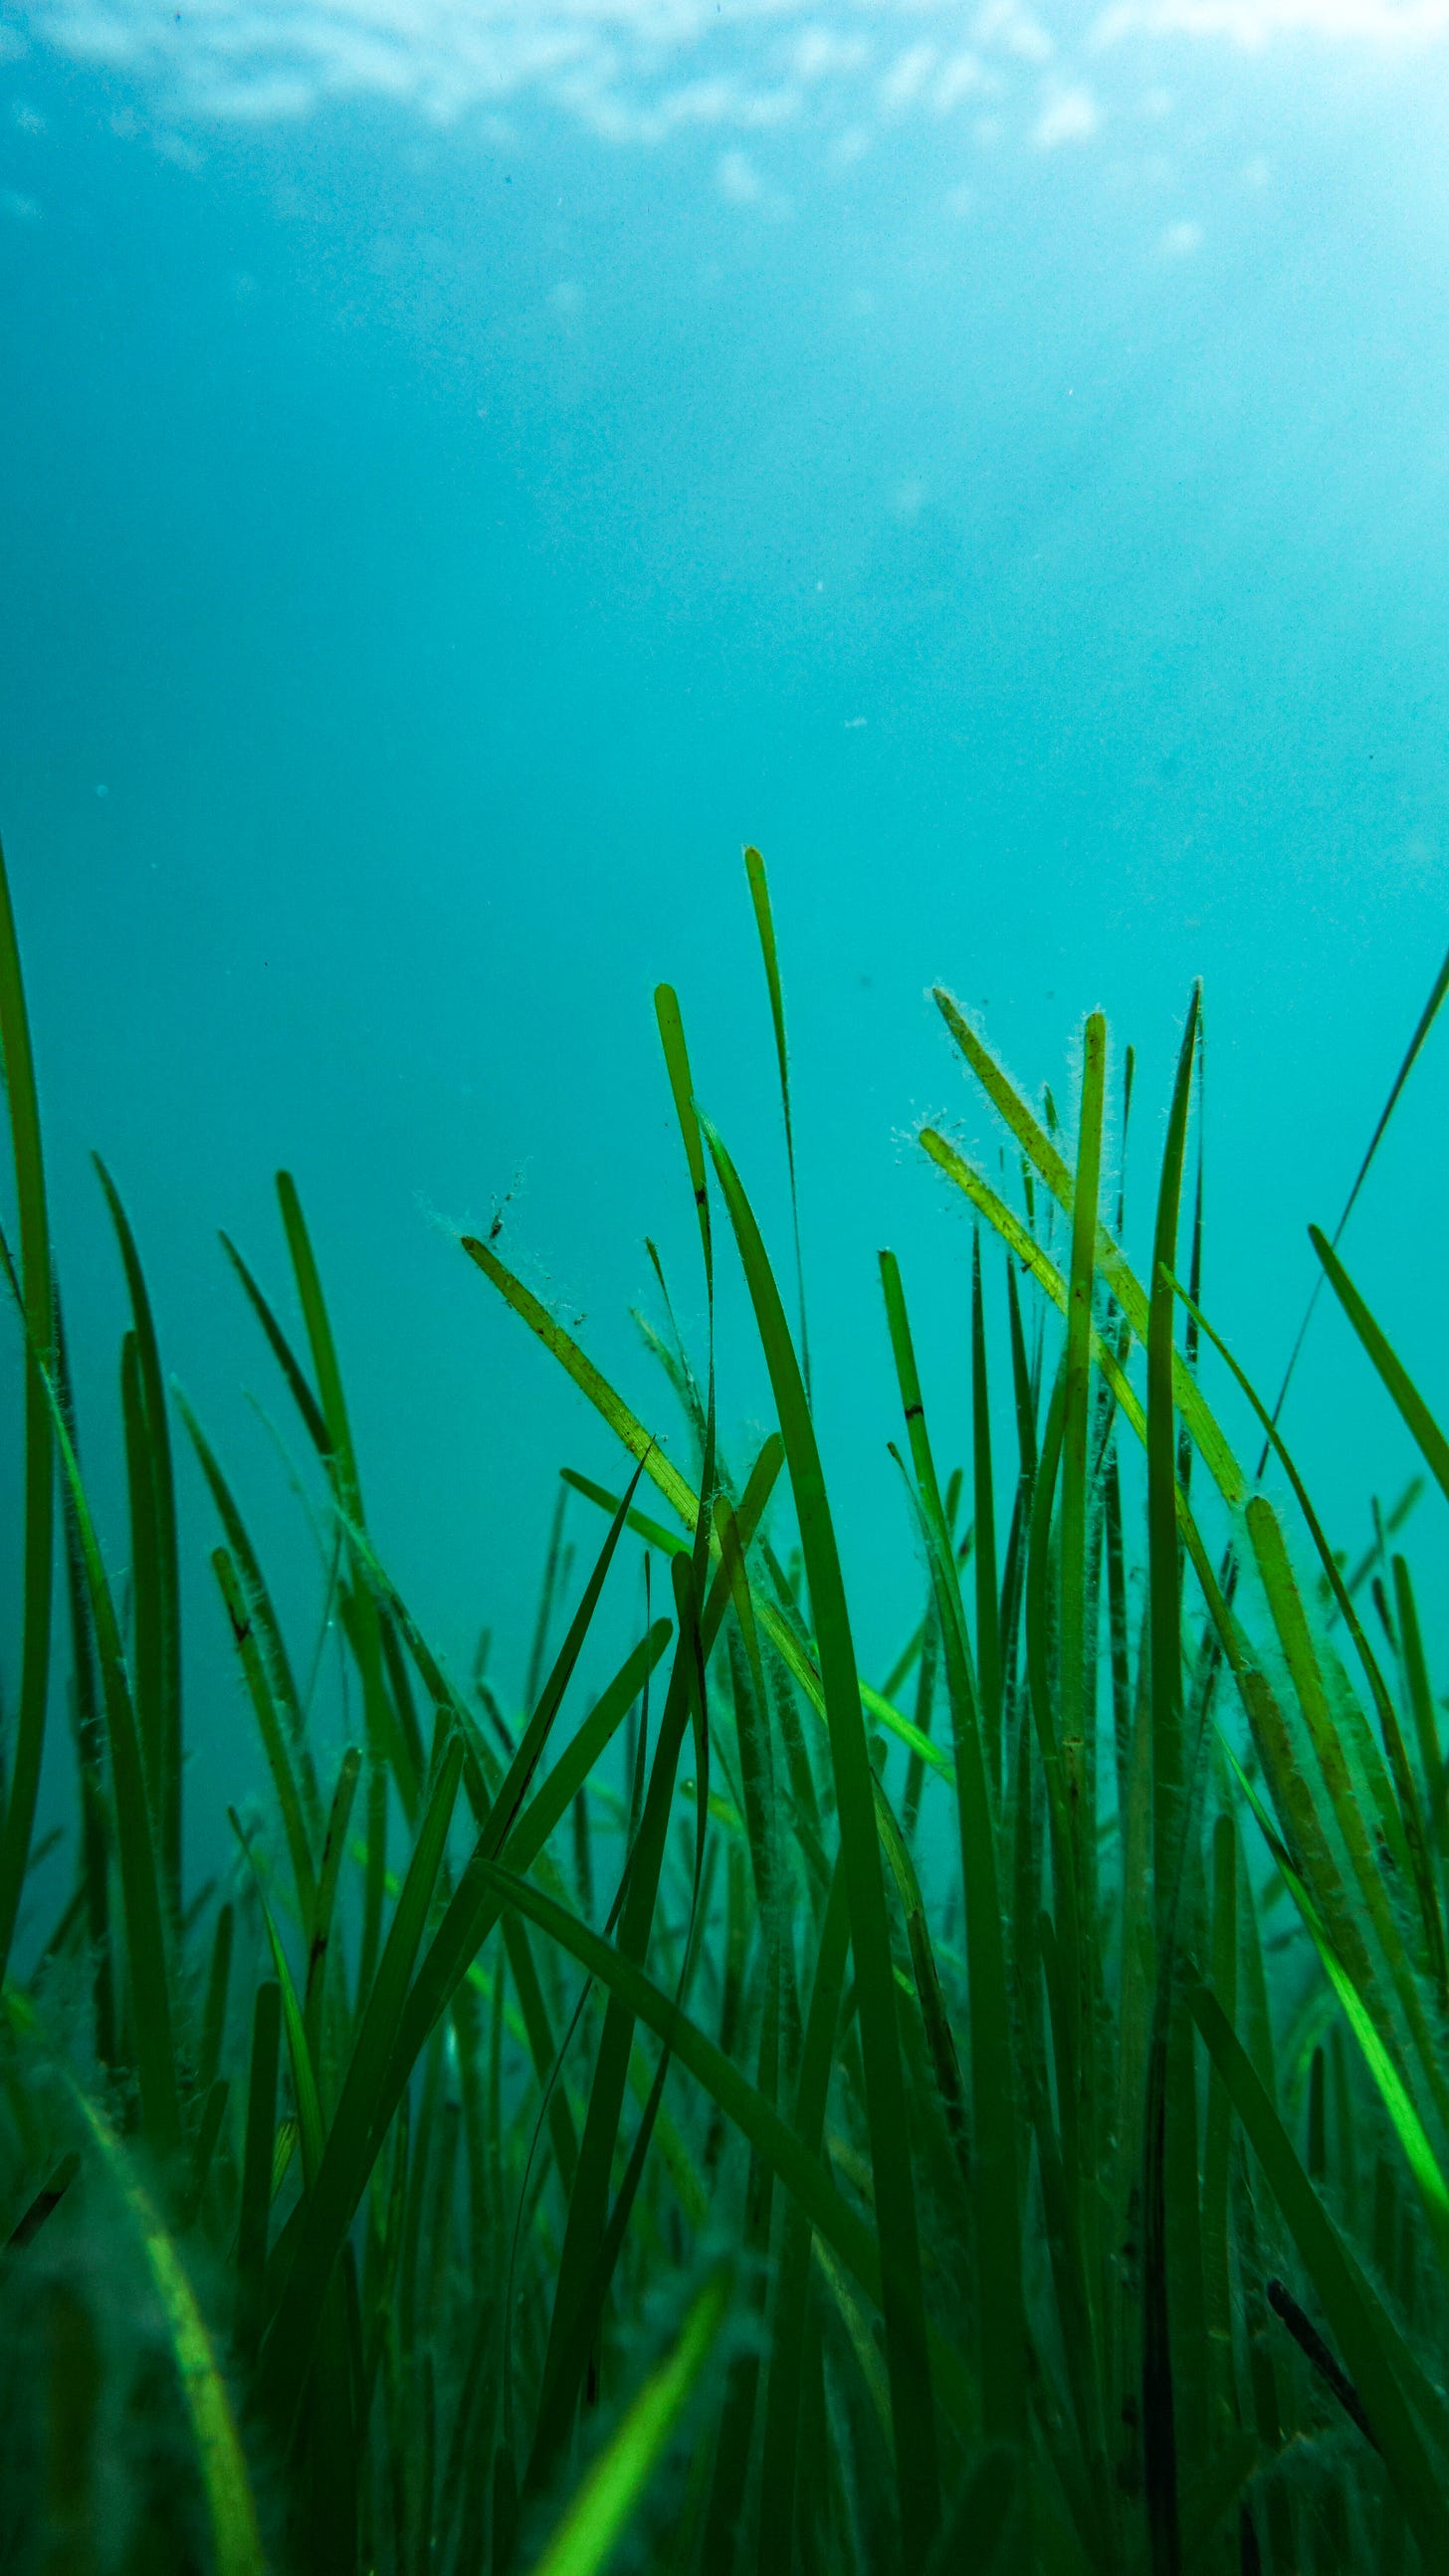 Seagrass meadow